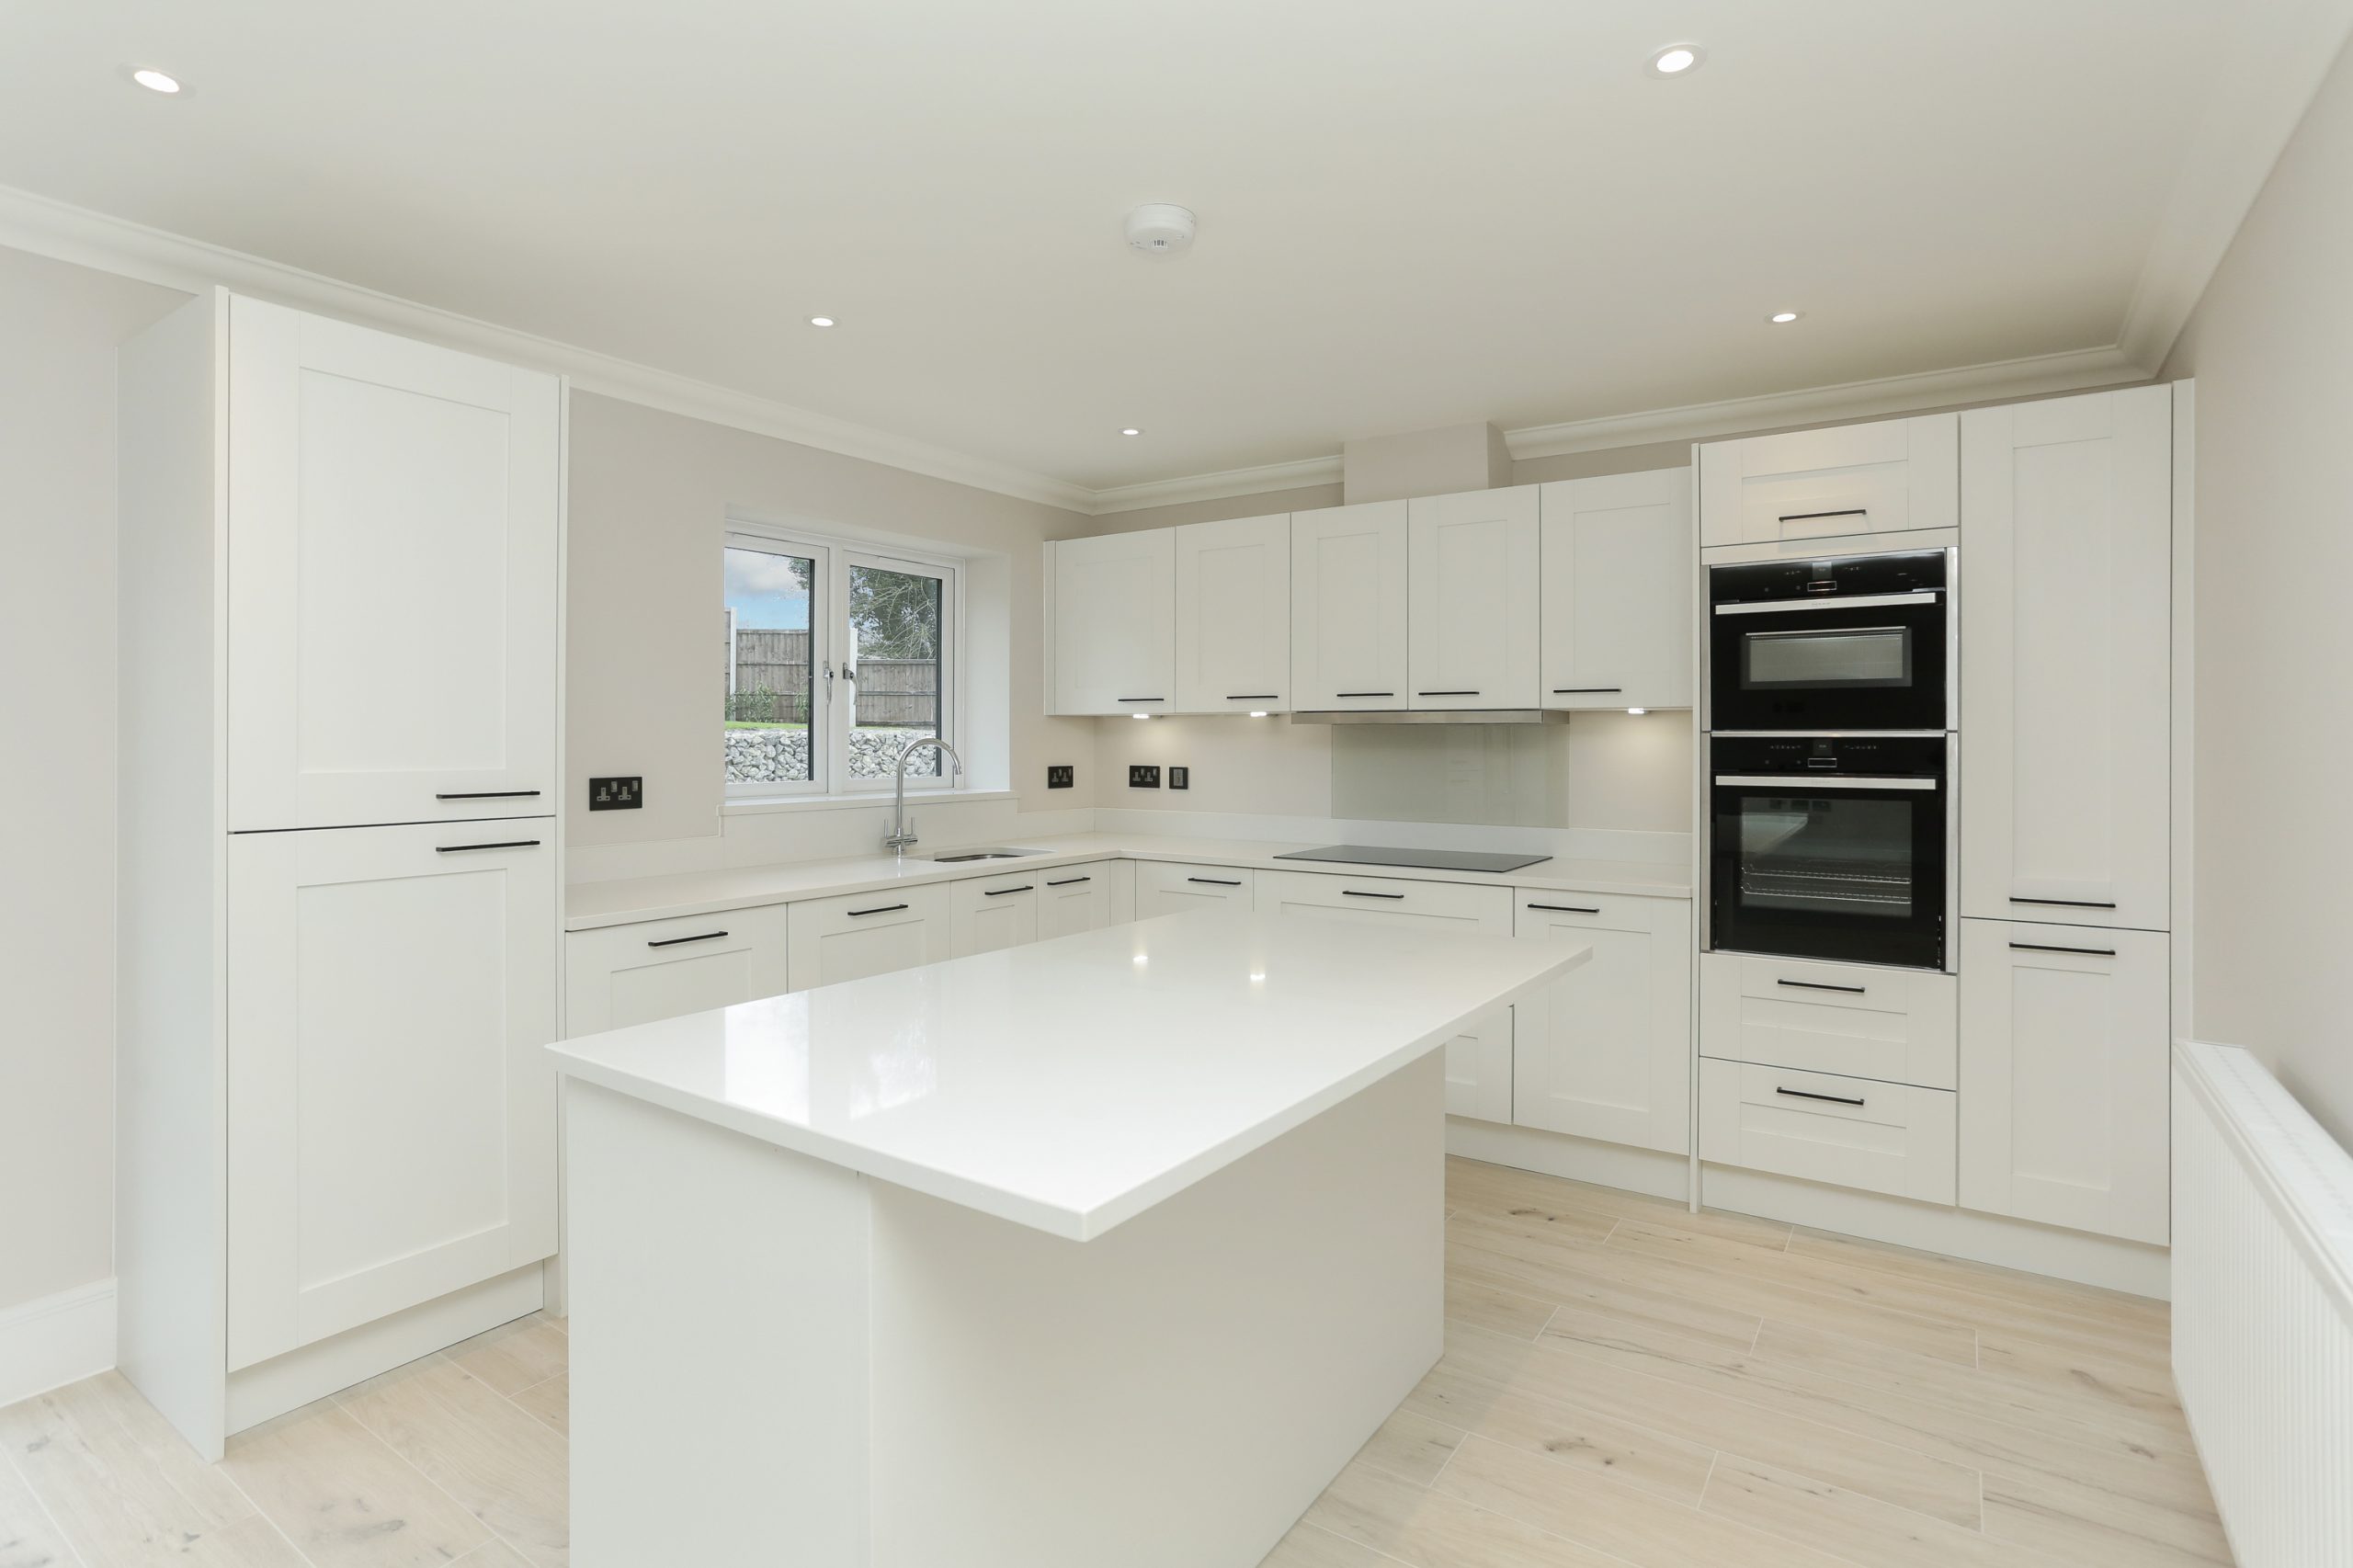 Fitted kitchen at our Woodside Court development